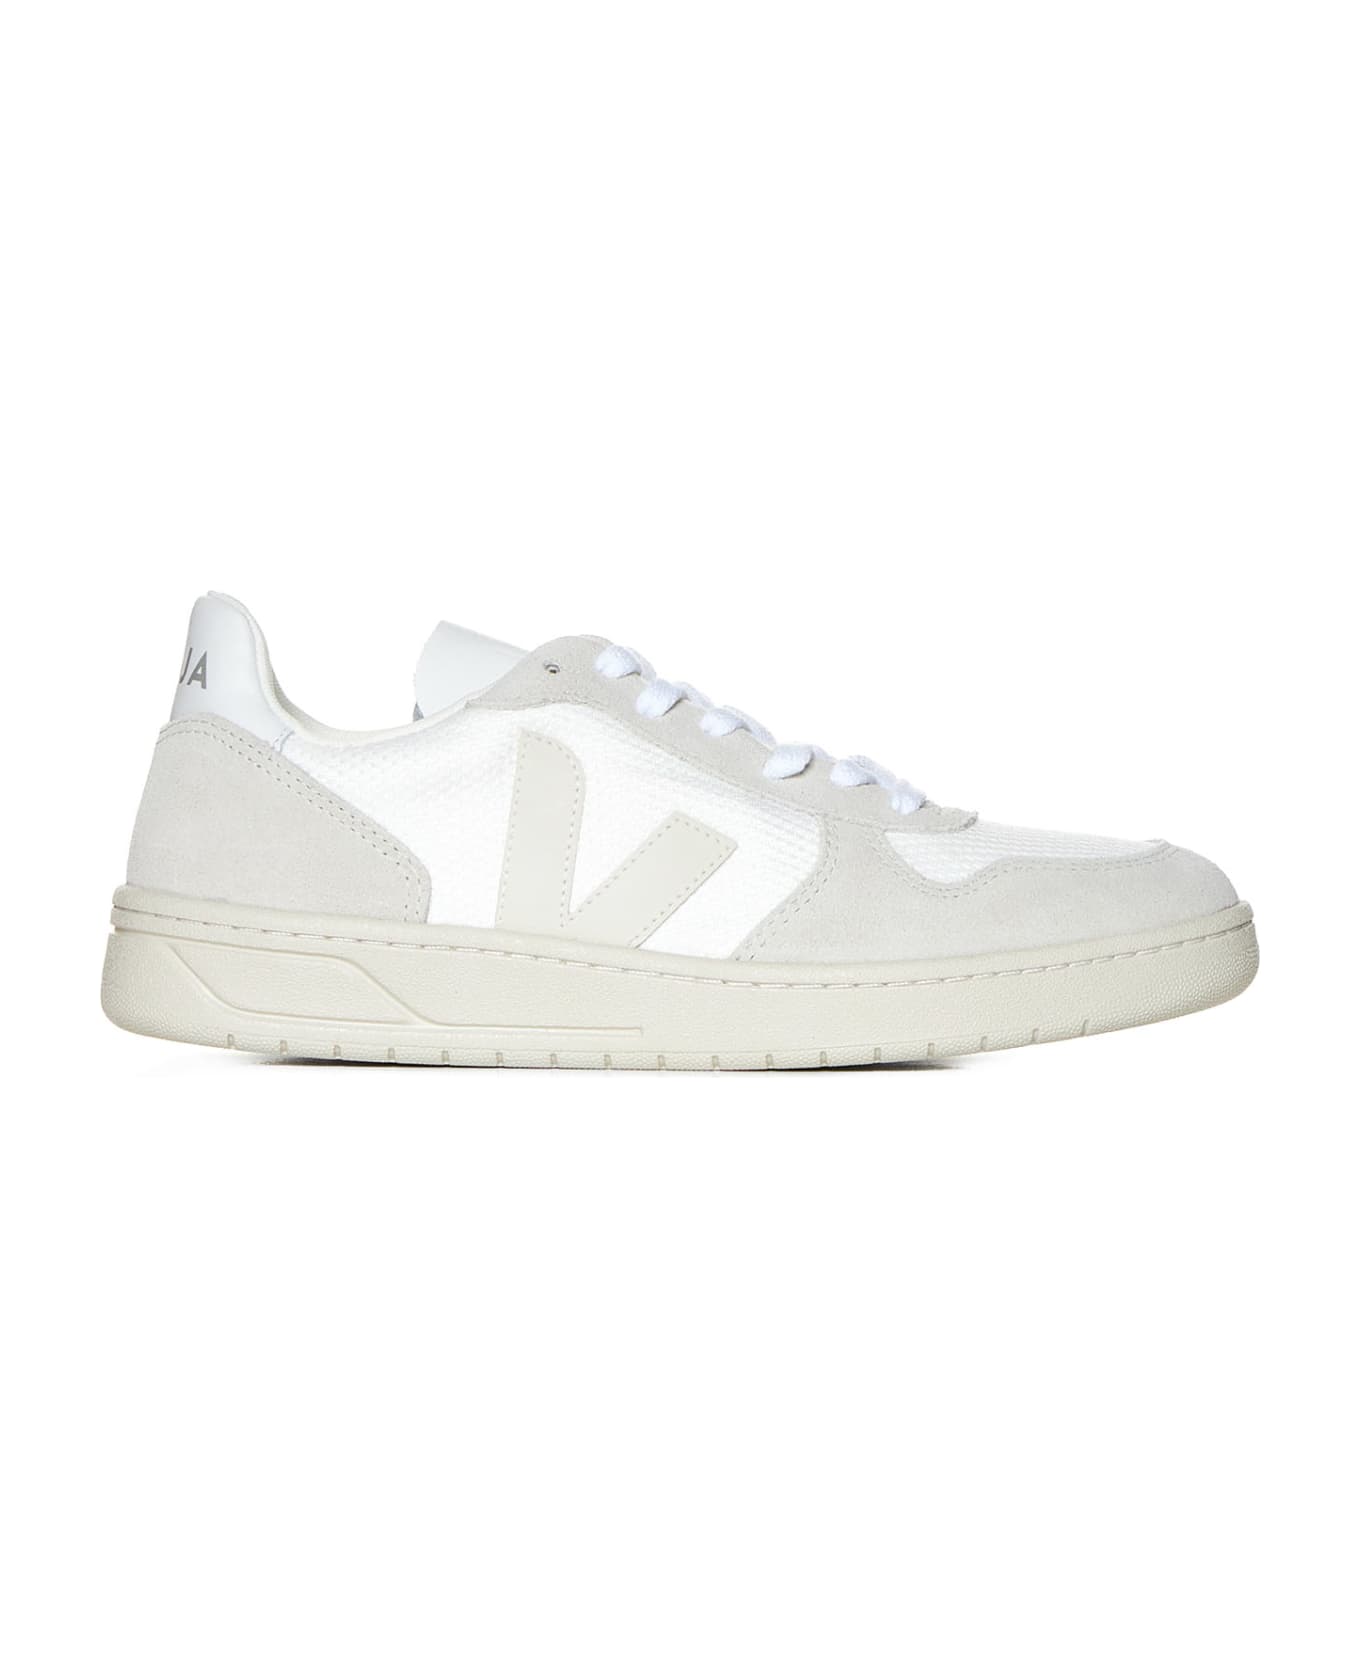 Veja Sneakers - White_natural_pierre